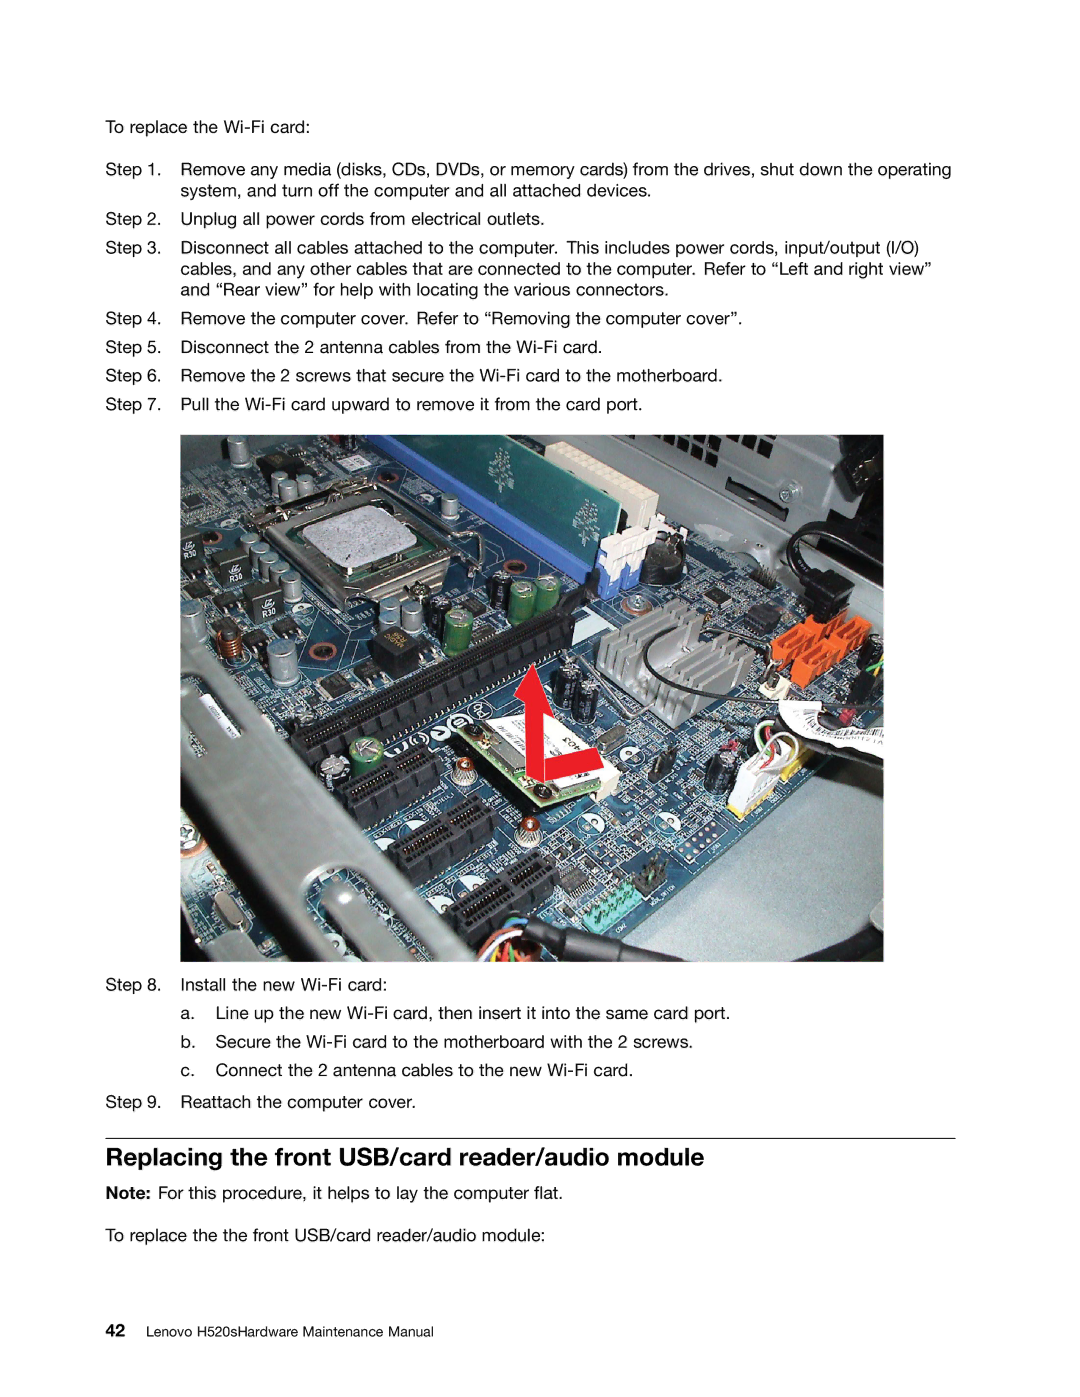 Lenovo H520S manual Replacing the front USB/card reader/audio module 